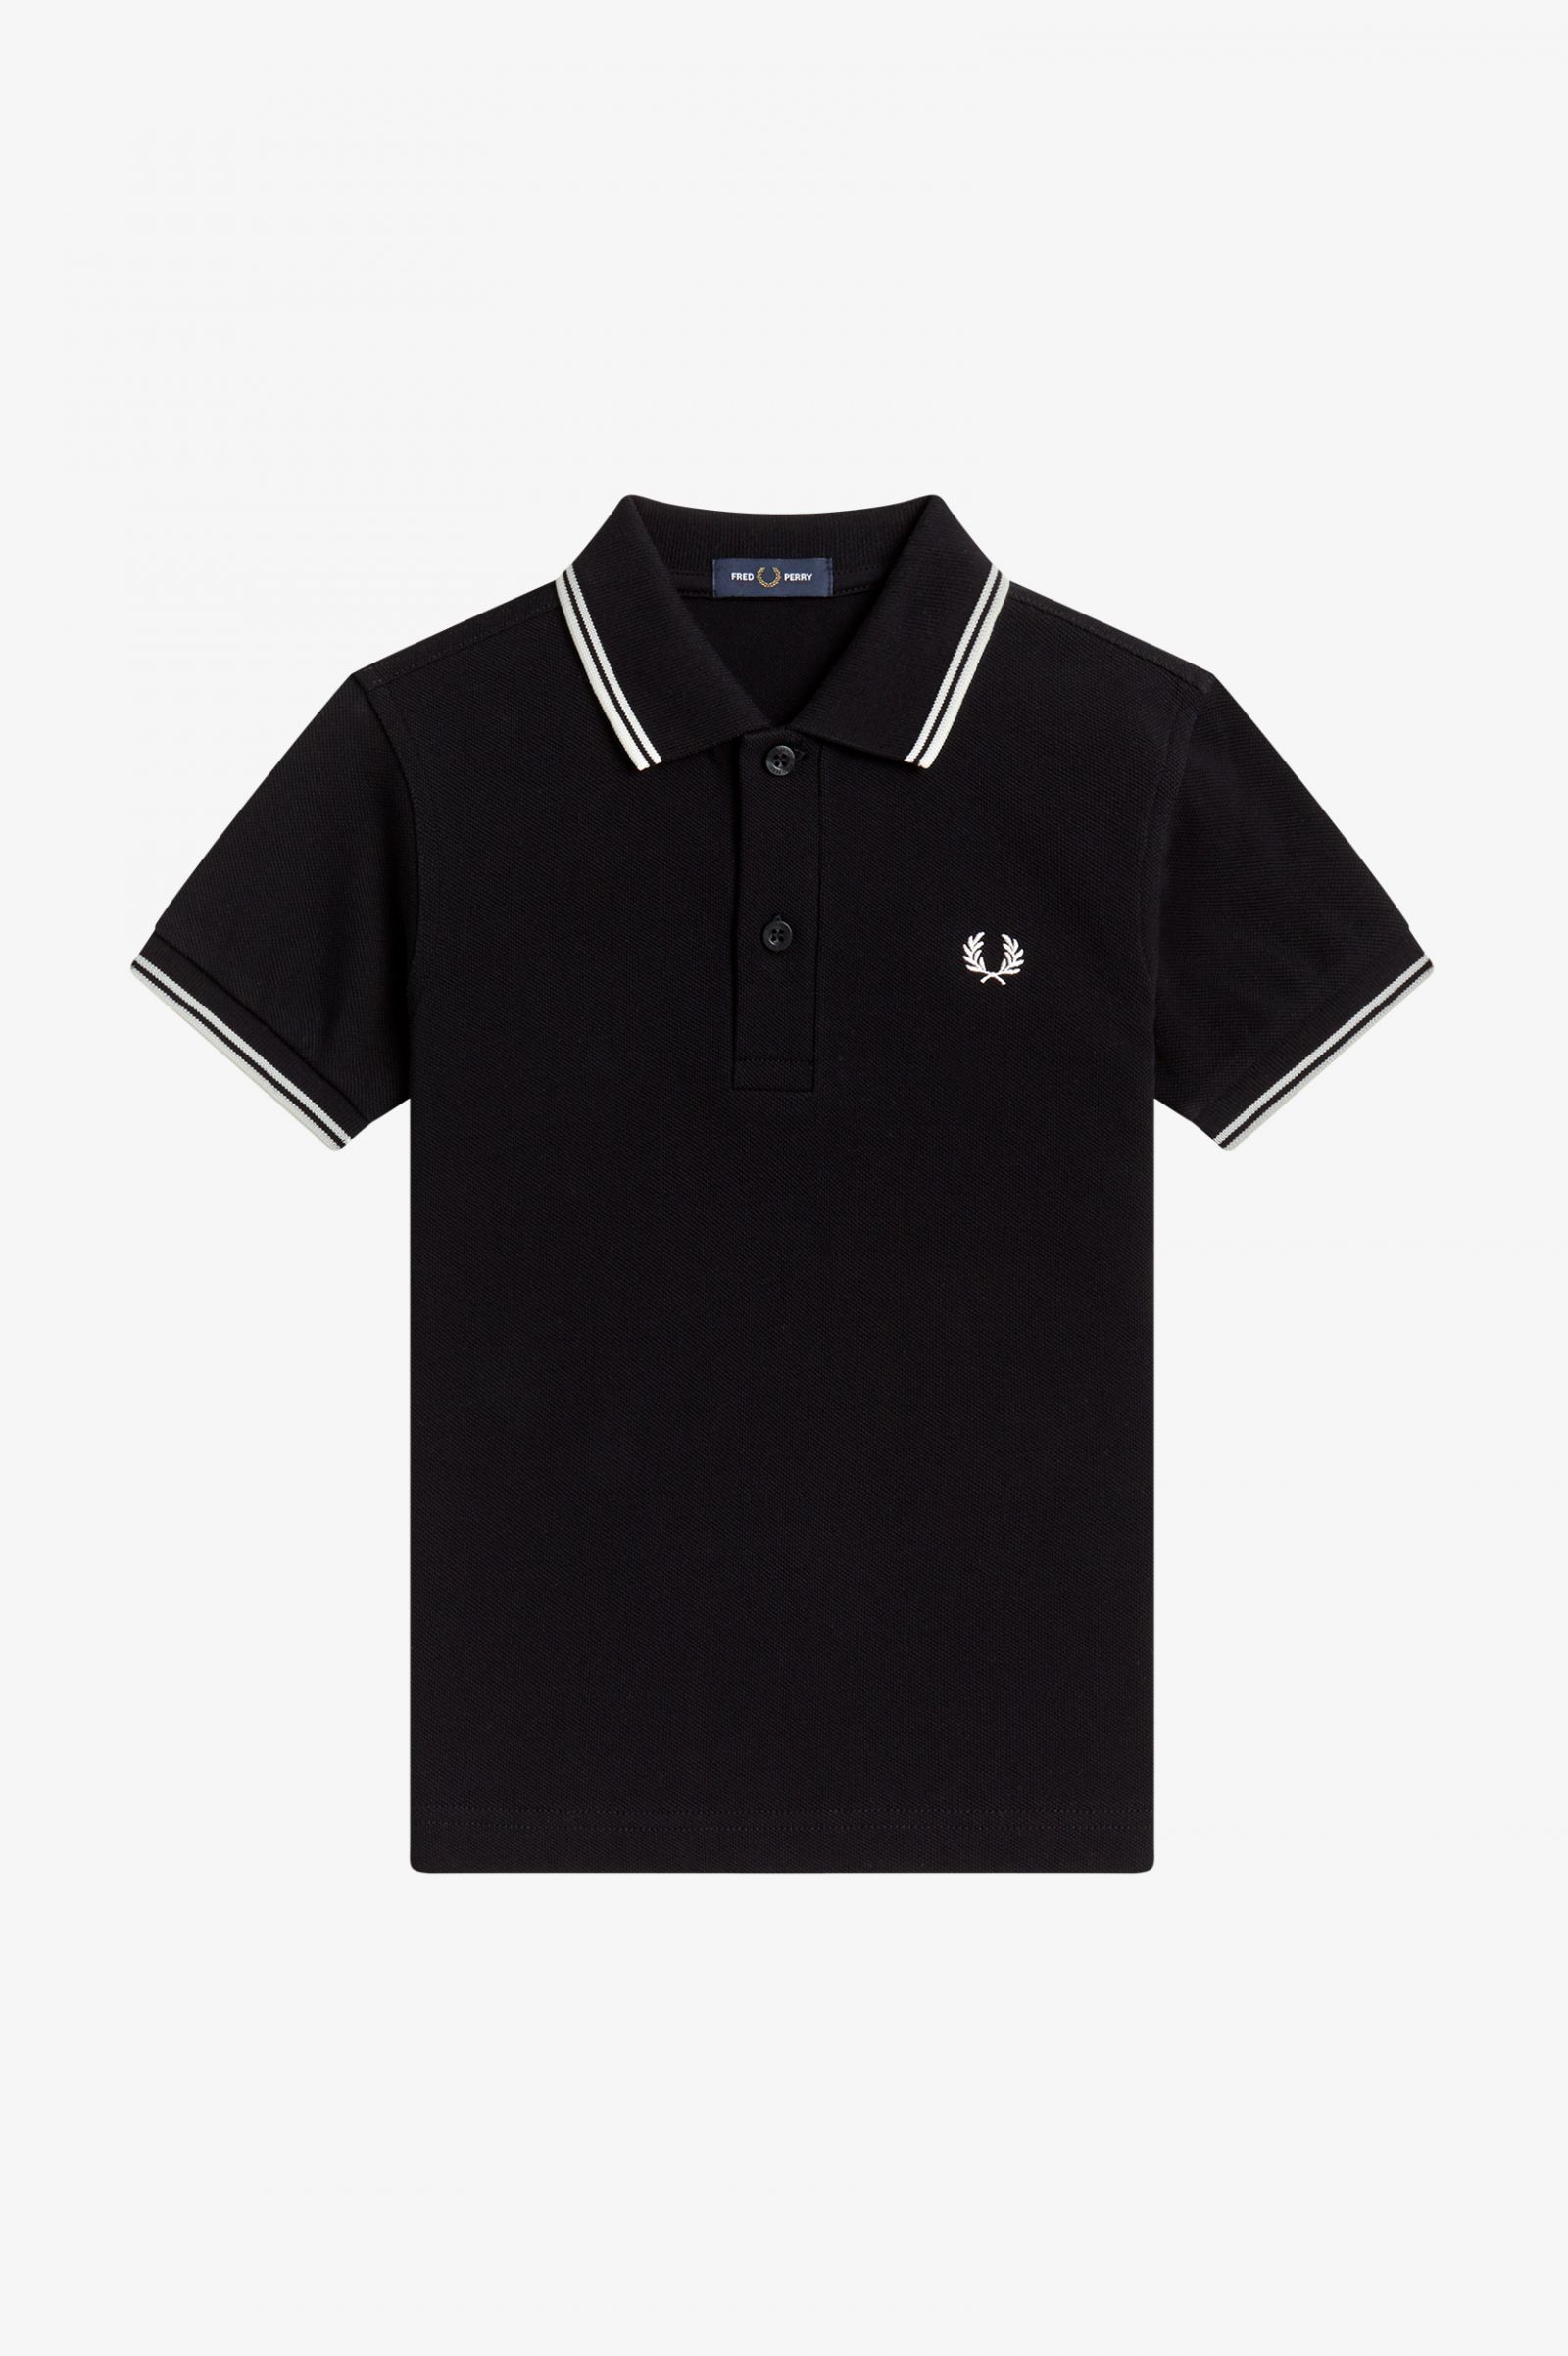 Black fred perry